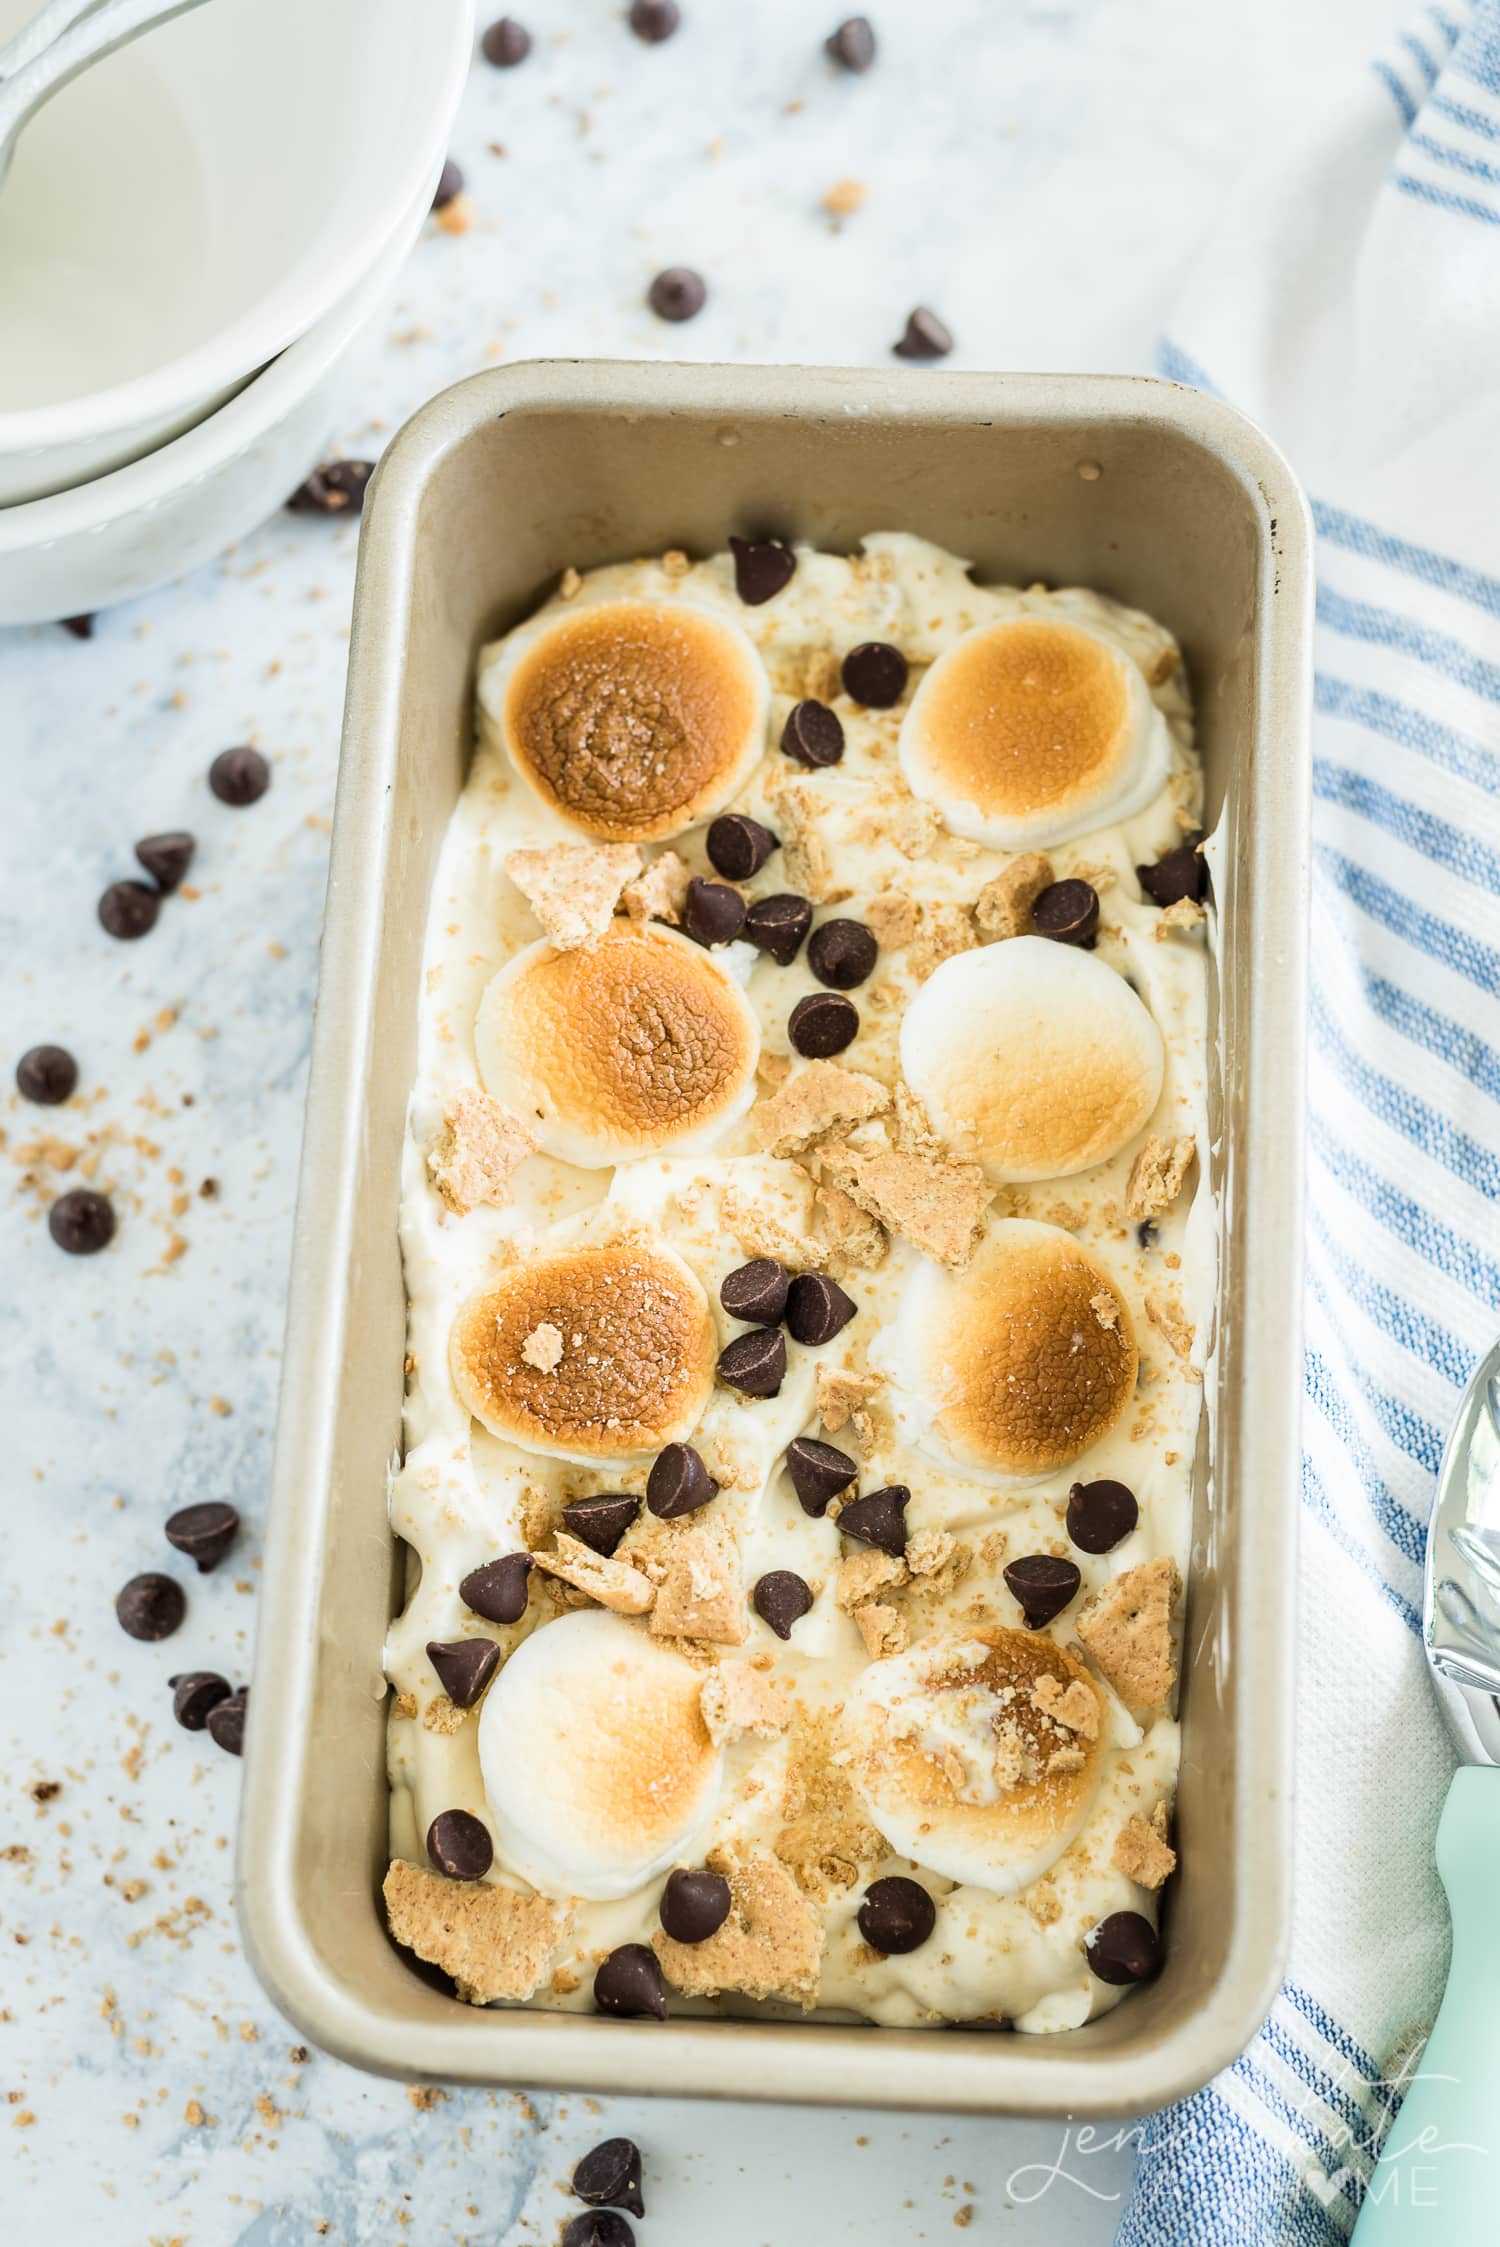 No churn s'mores ice cream with roasted marshmallow topping